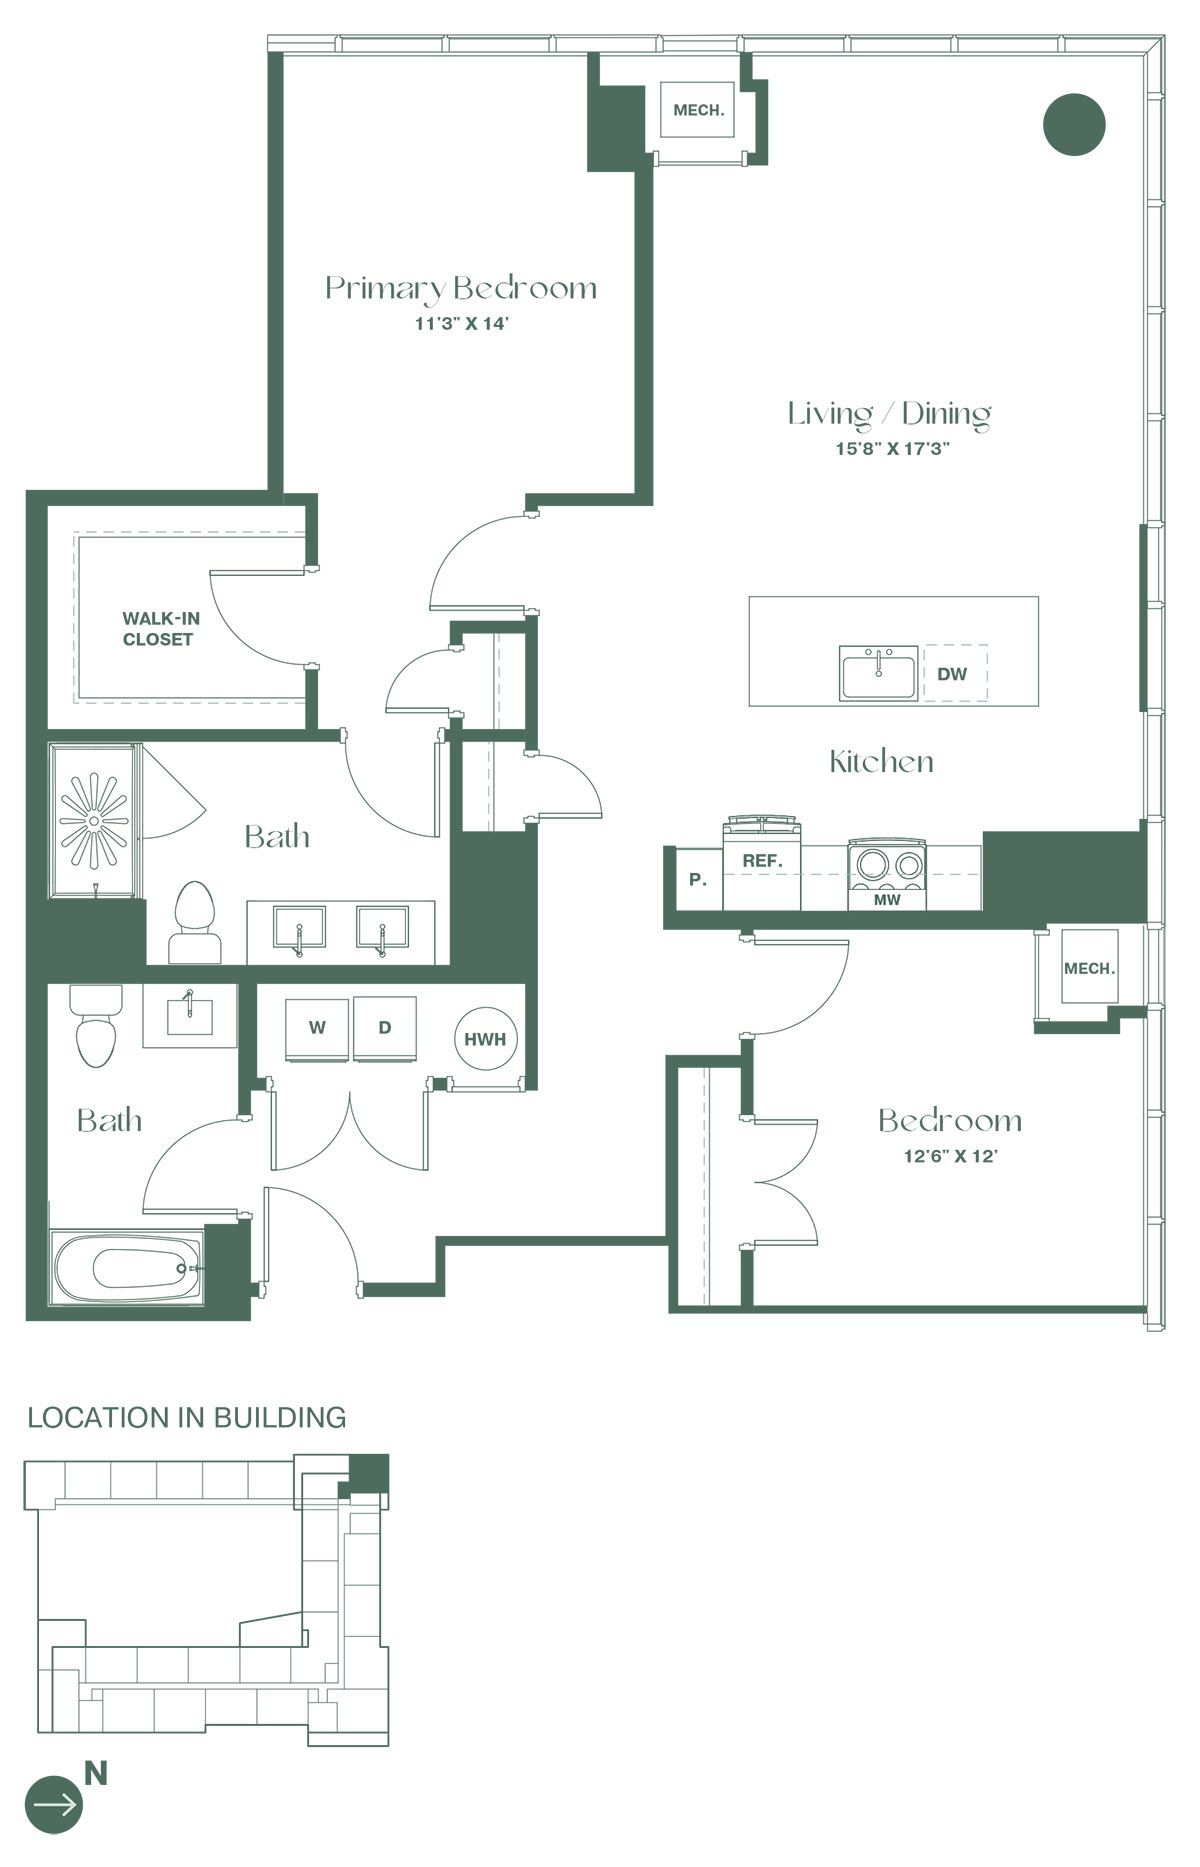 Floorplan for a two bedroom, two bathroom apartment at RVR at Xchange shows a hallway leading to a full bathroom and a bedroom. As you continue into the apartment it opens to a fully equipped kitchen with a dishwasher and a pantry and a spacious living and dining room area. To the left is the entrance to the primary bedroom suite, featuring a walk-in closet and full bathroom.